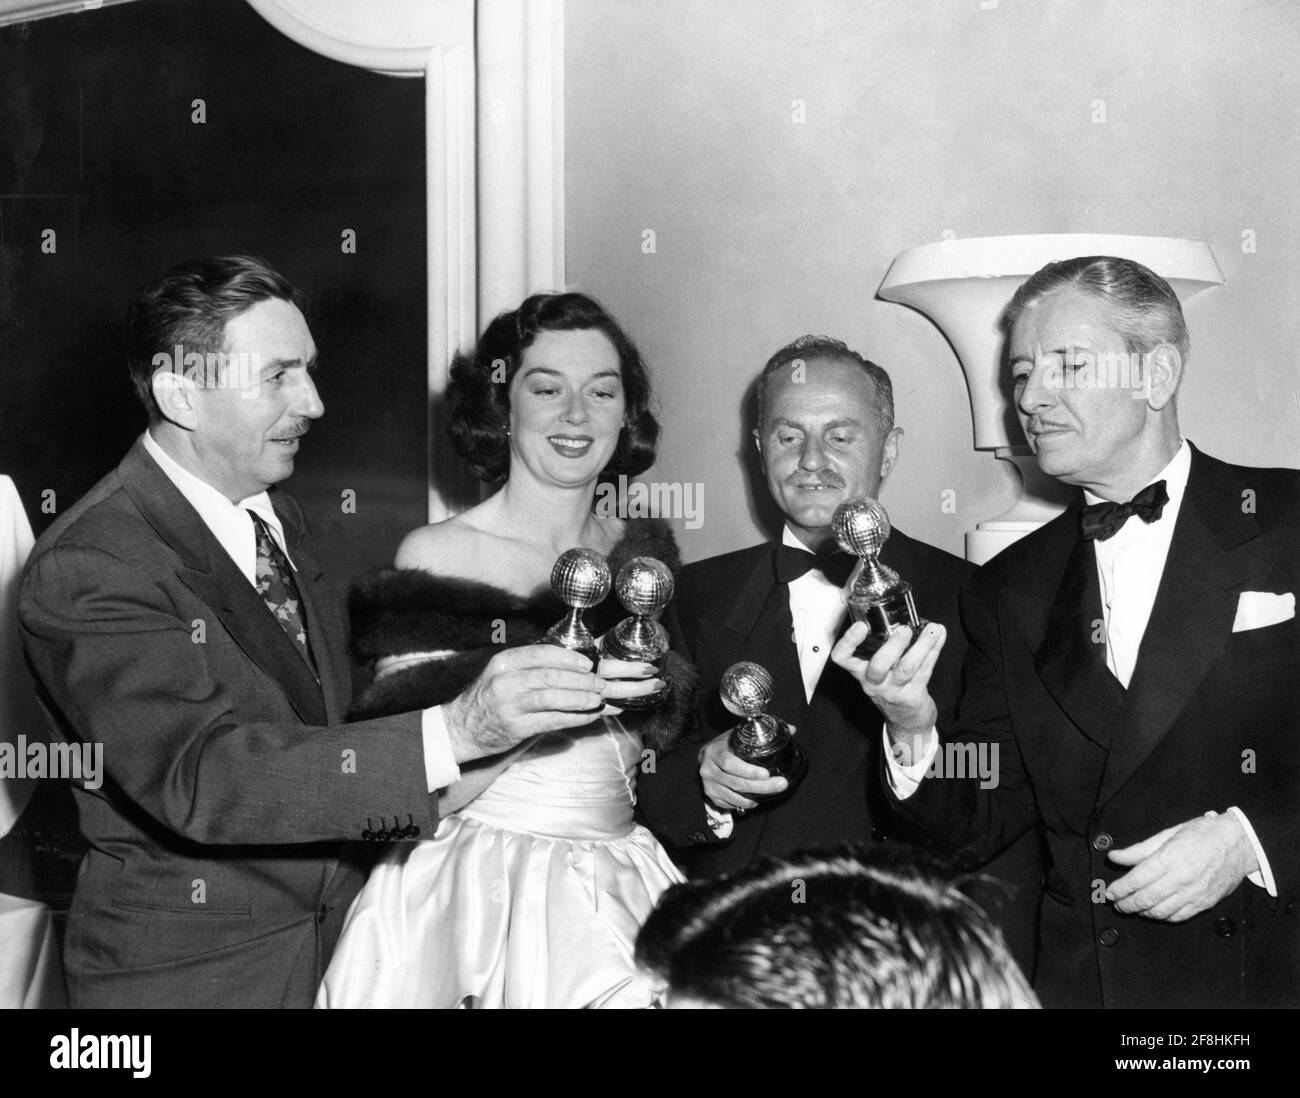 1948 5th Golden Globes Awards of the Hollywood Press Association on March 10th with winners of awards for Best Films of  1947 from left WALT DISNEY (Special Achievement Award) ROSALIND RUSSELL (Best Actress for Mourning Becomes Electra) DARRYL F. ZANUCK (Best Film Gentleman's Agreement) and RONALD COLMAN (Best Actor for A DOUBLE LIFE) held at the Hollywood Roosevelt Hotel in Los Angeles Stock Photo